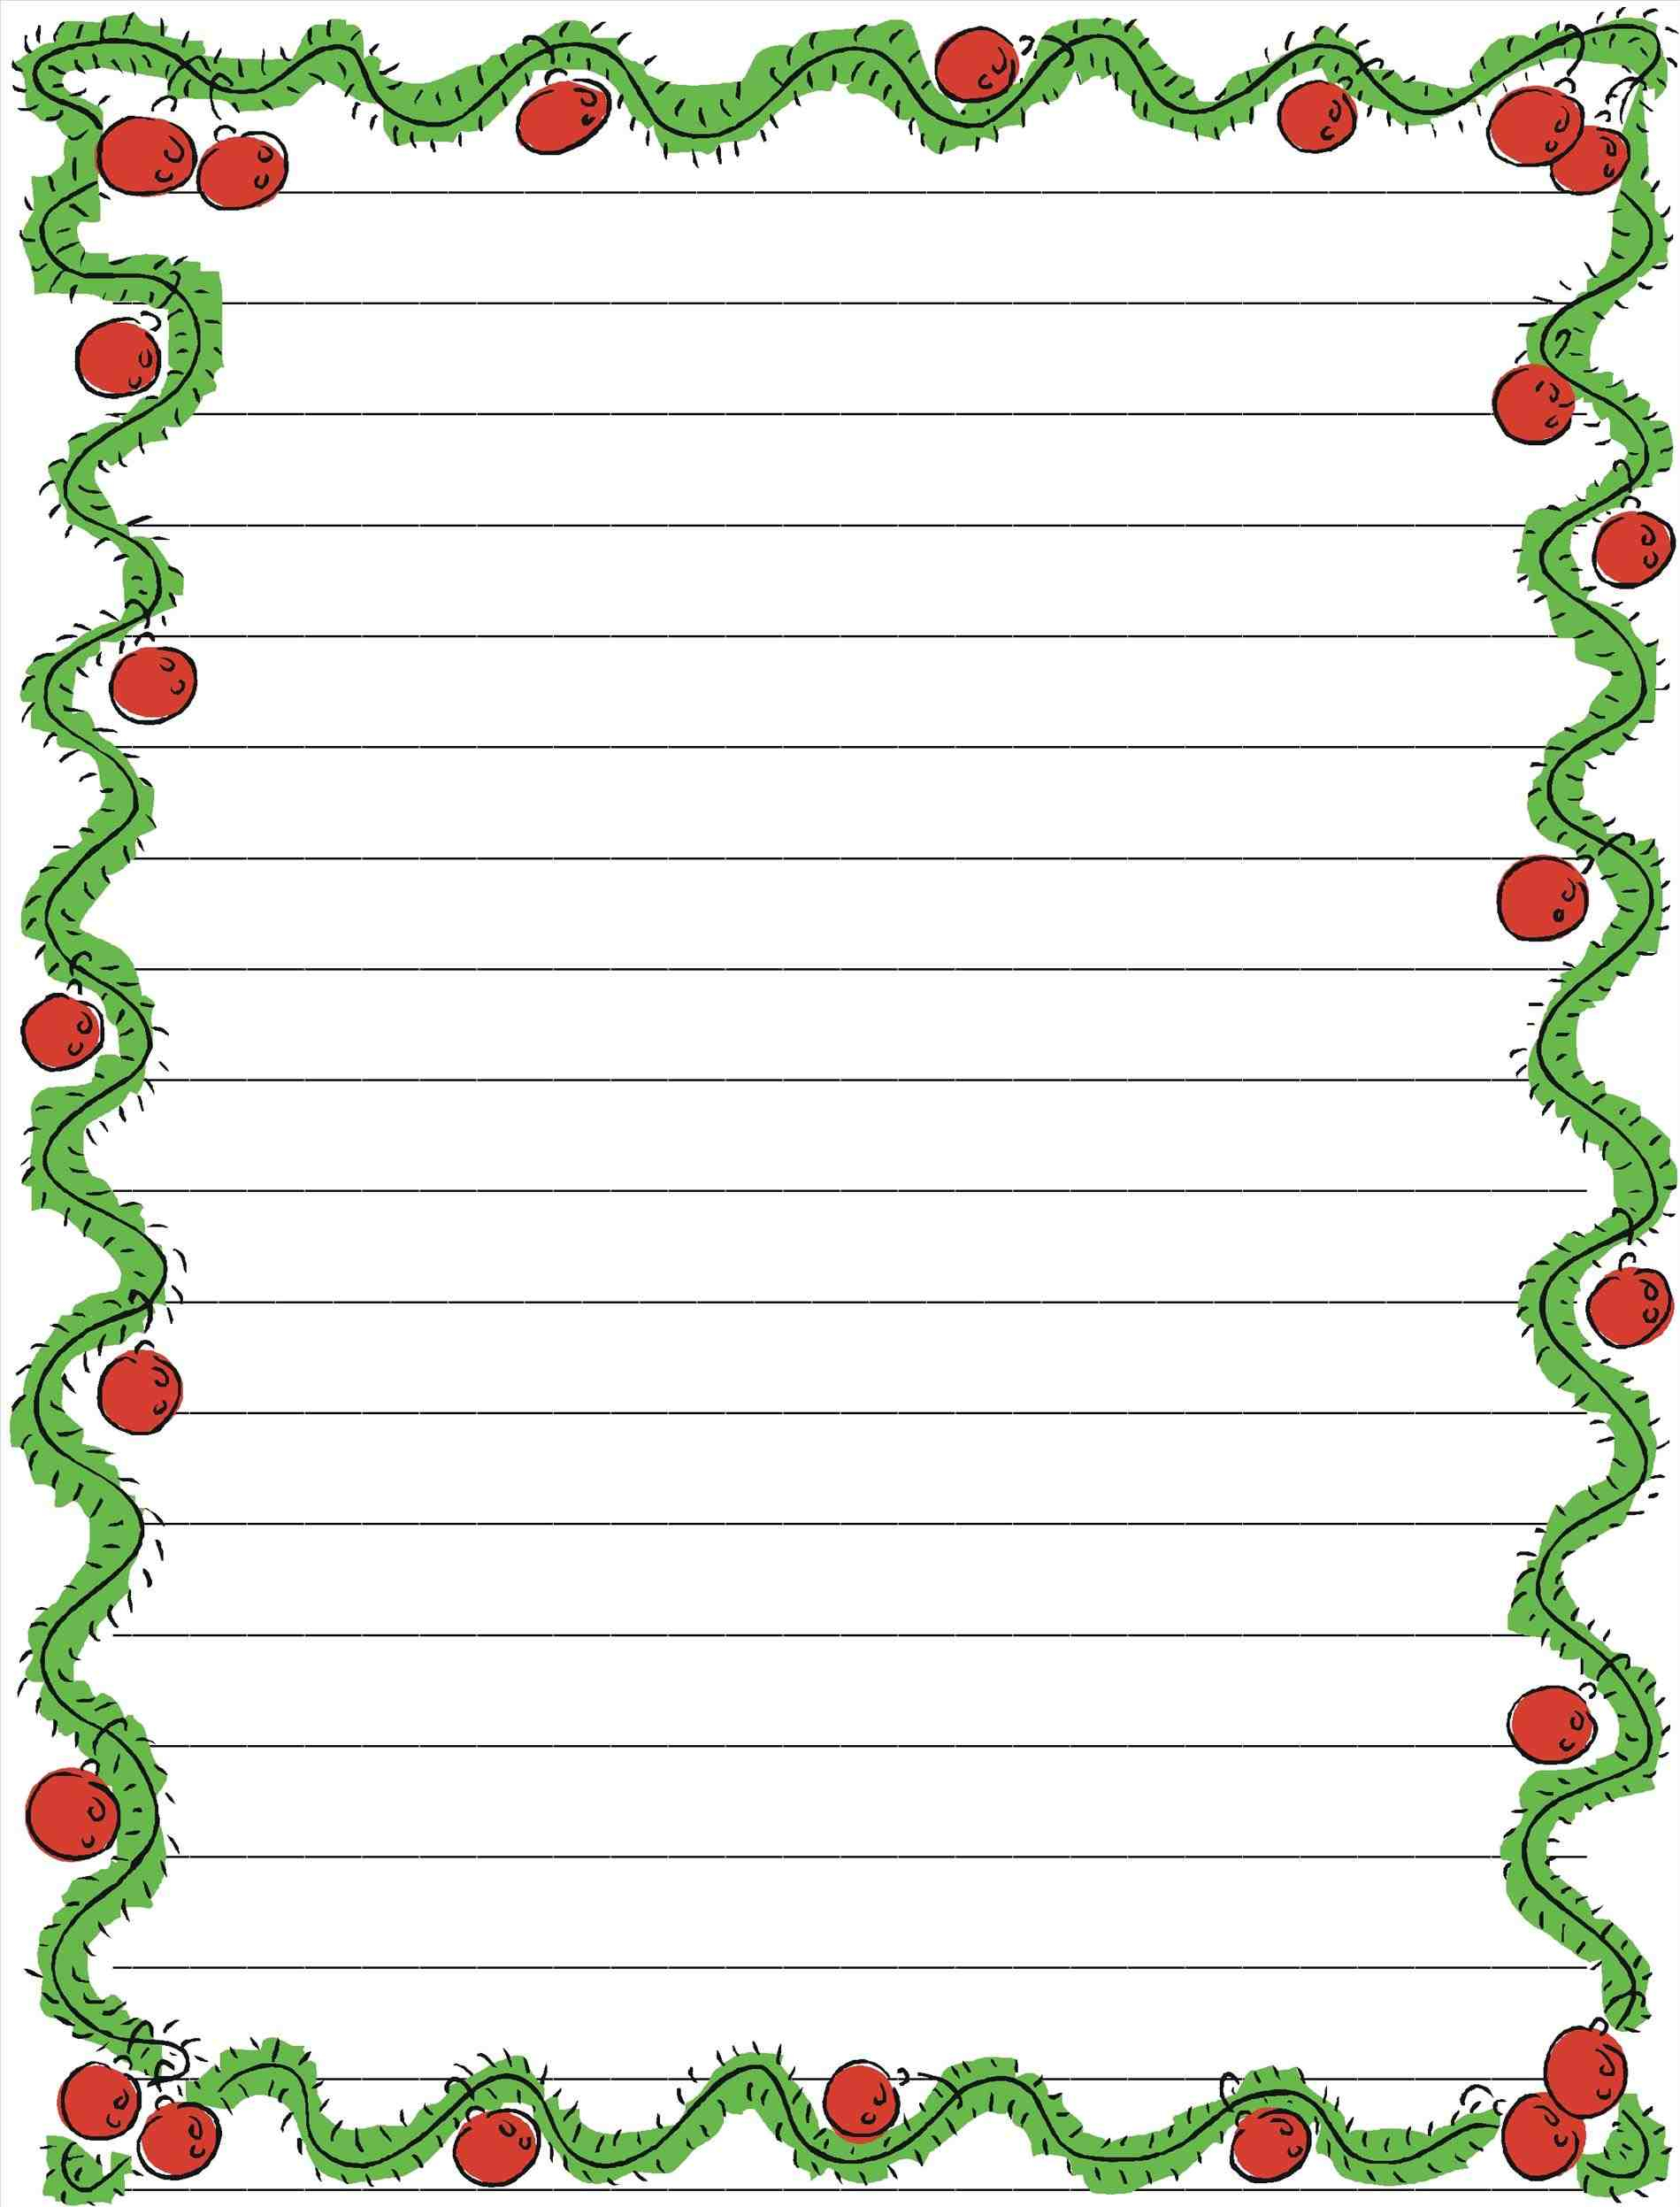 Free Christmas Borders For Microsoft Word | Free Download With Regard To Christmas Border Word Template